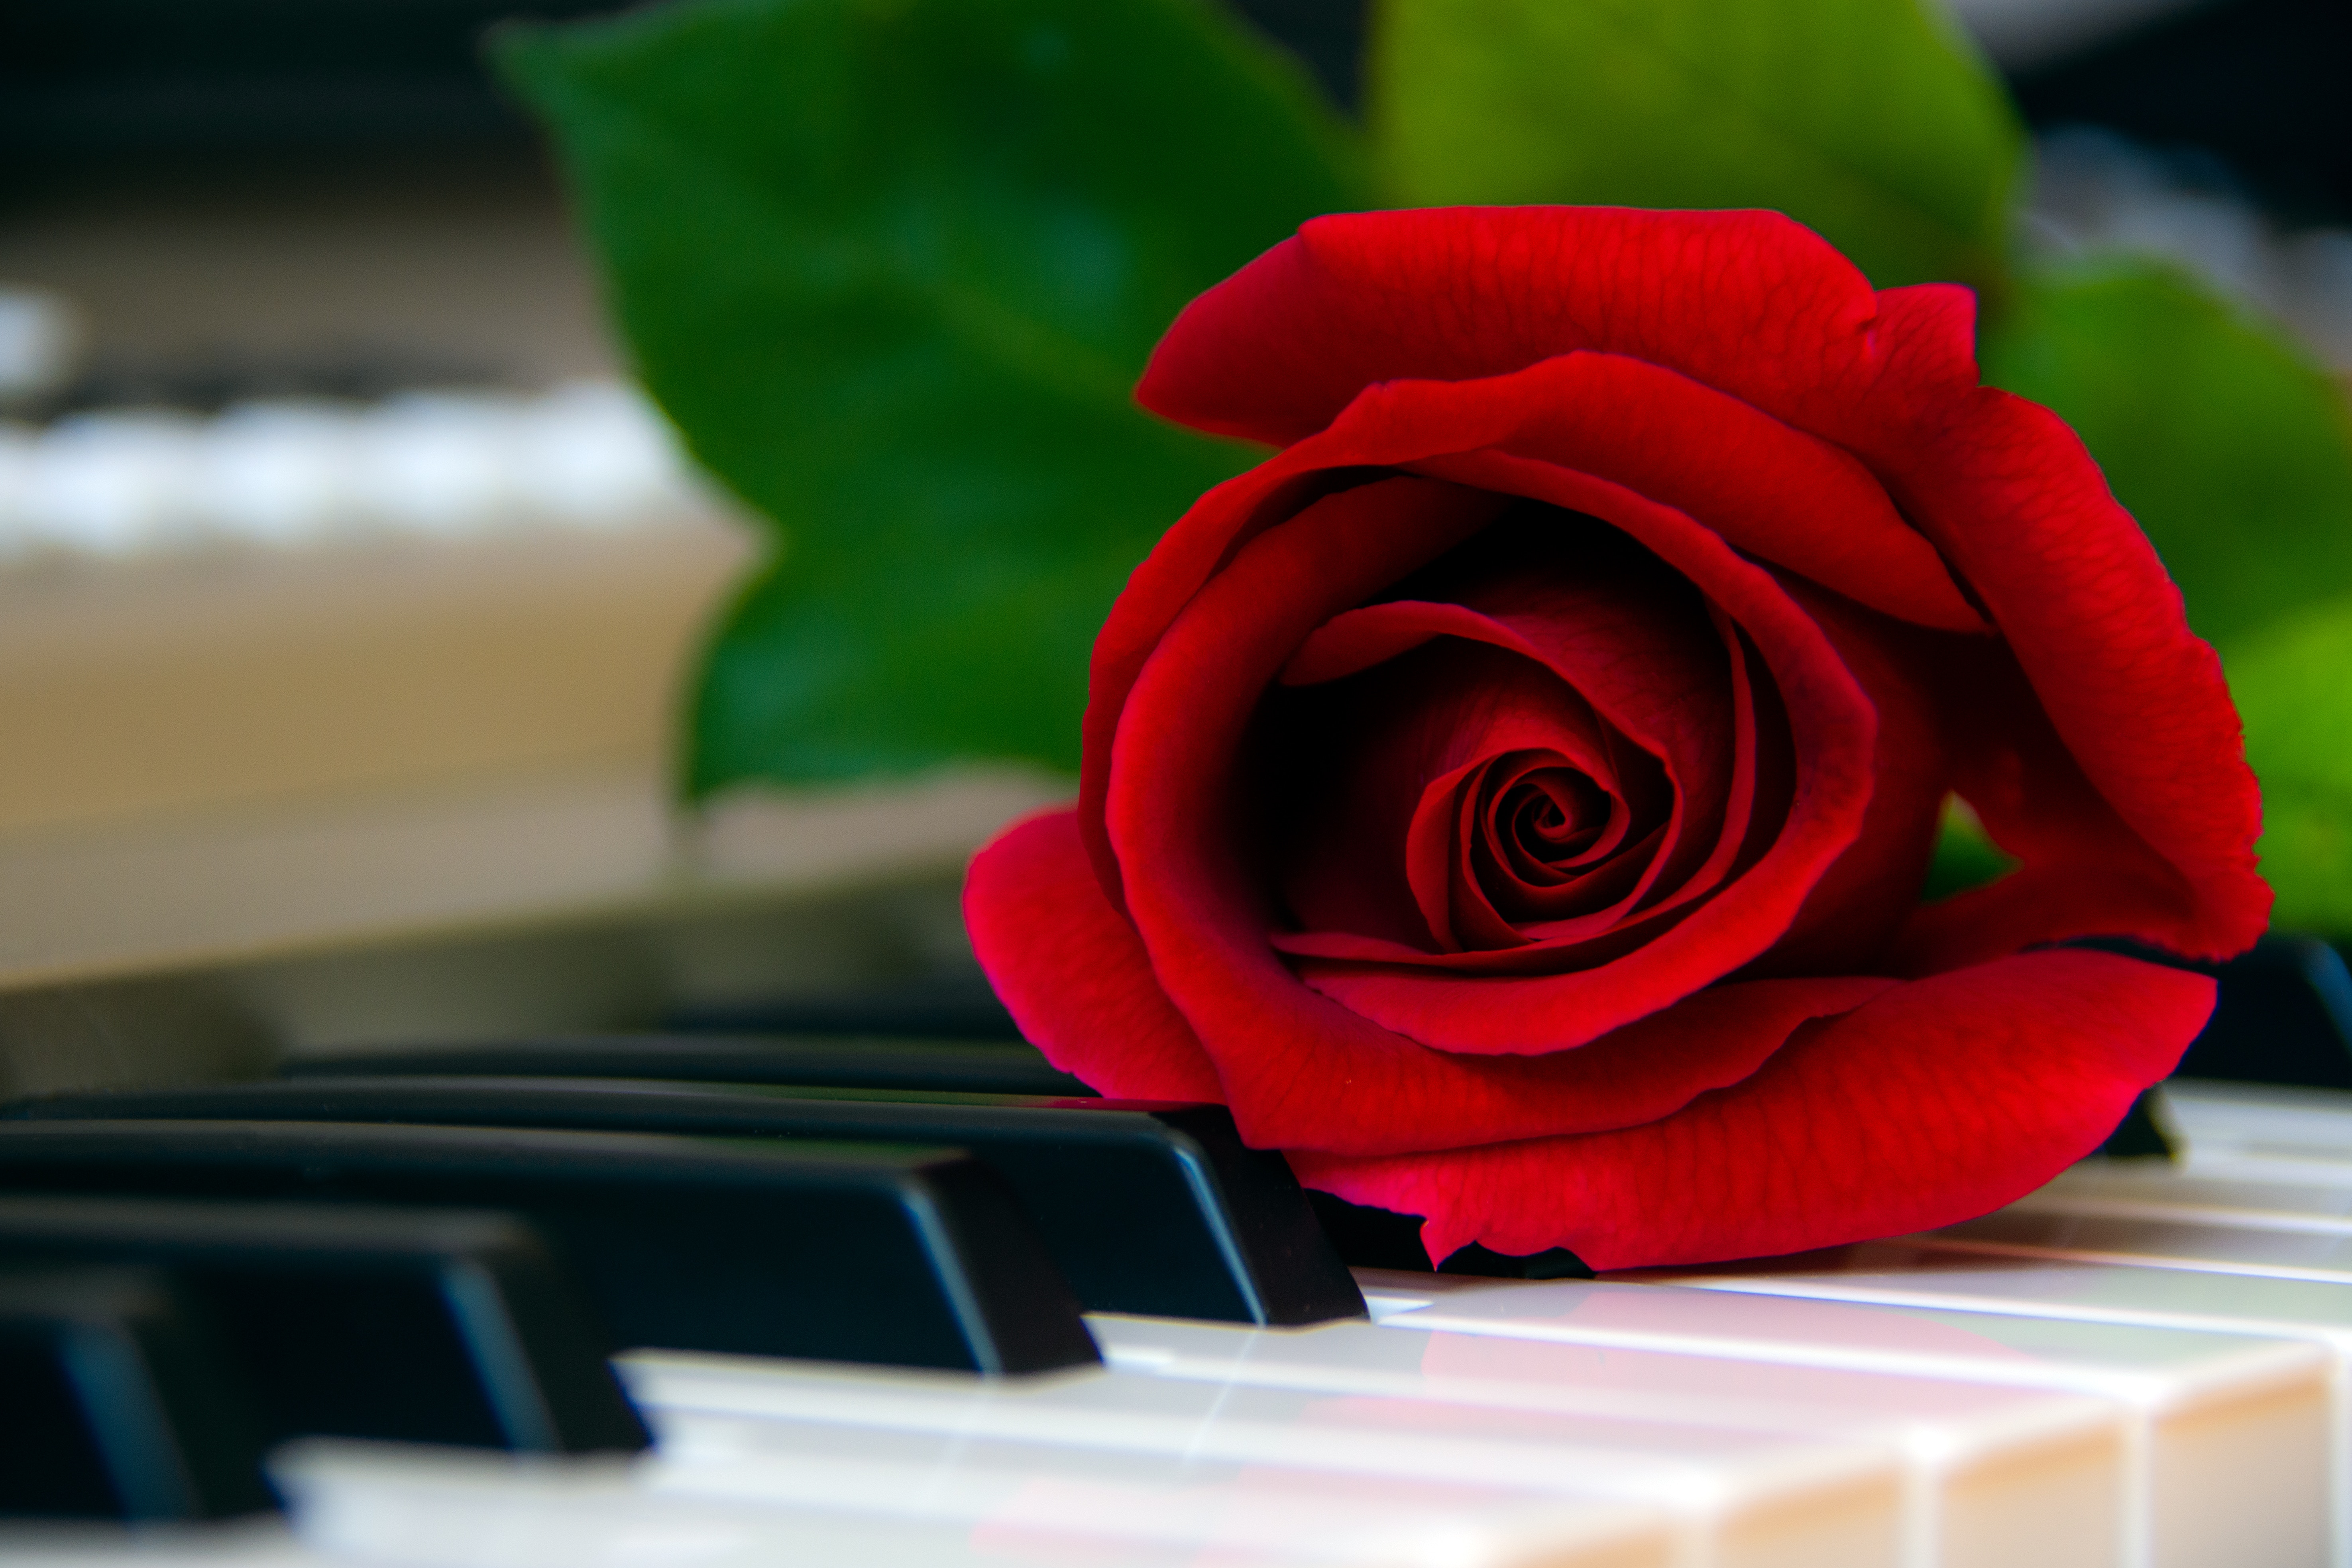 Wallpaper for mobile devices piano, rose flower, red, flower